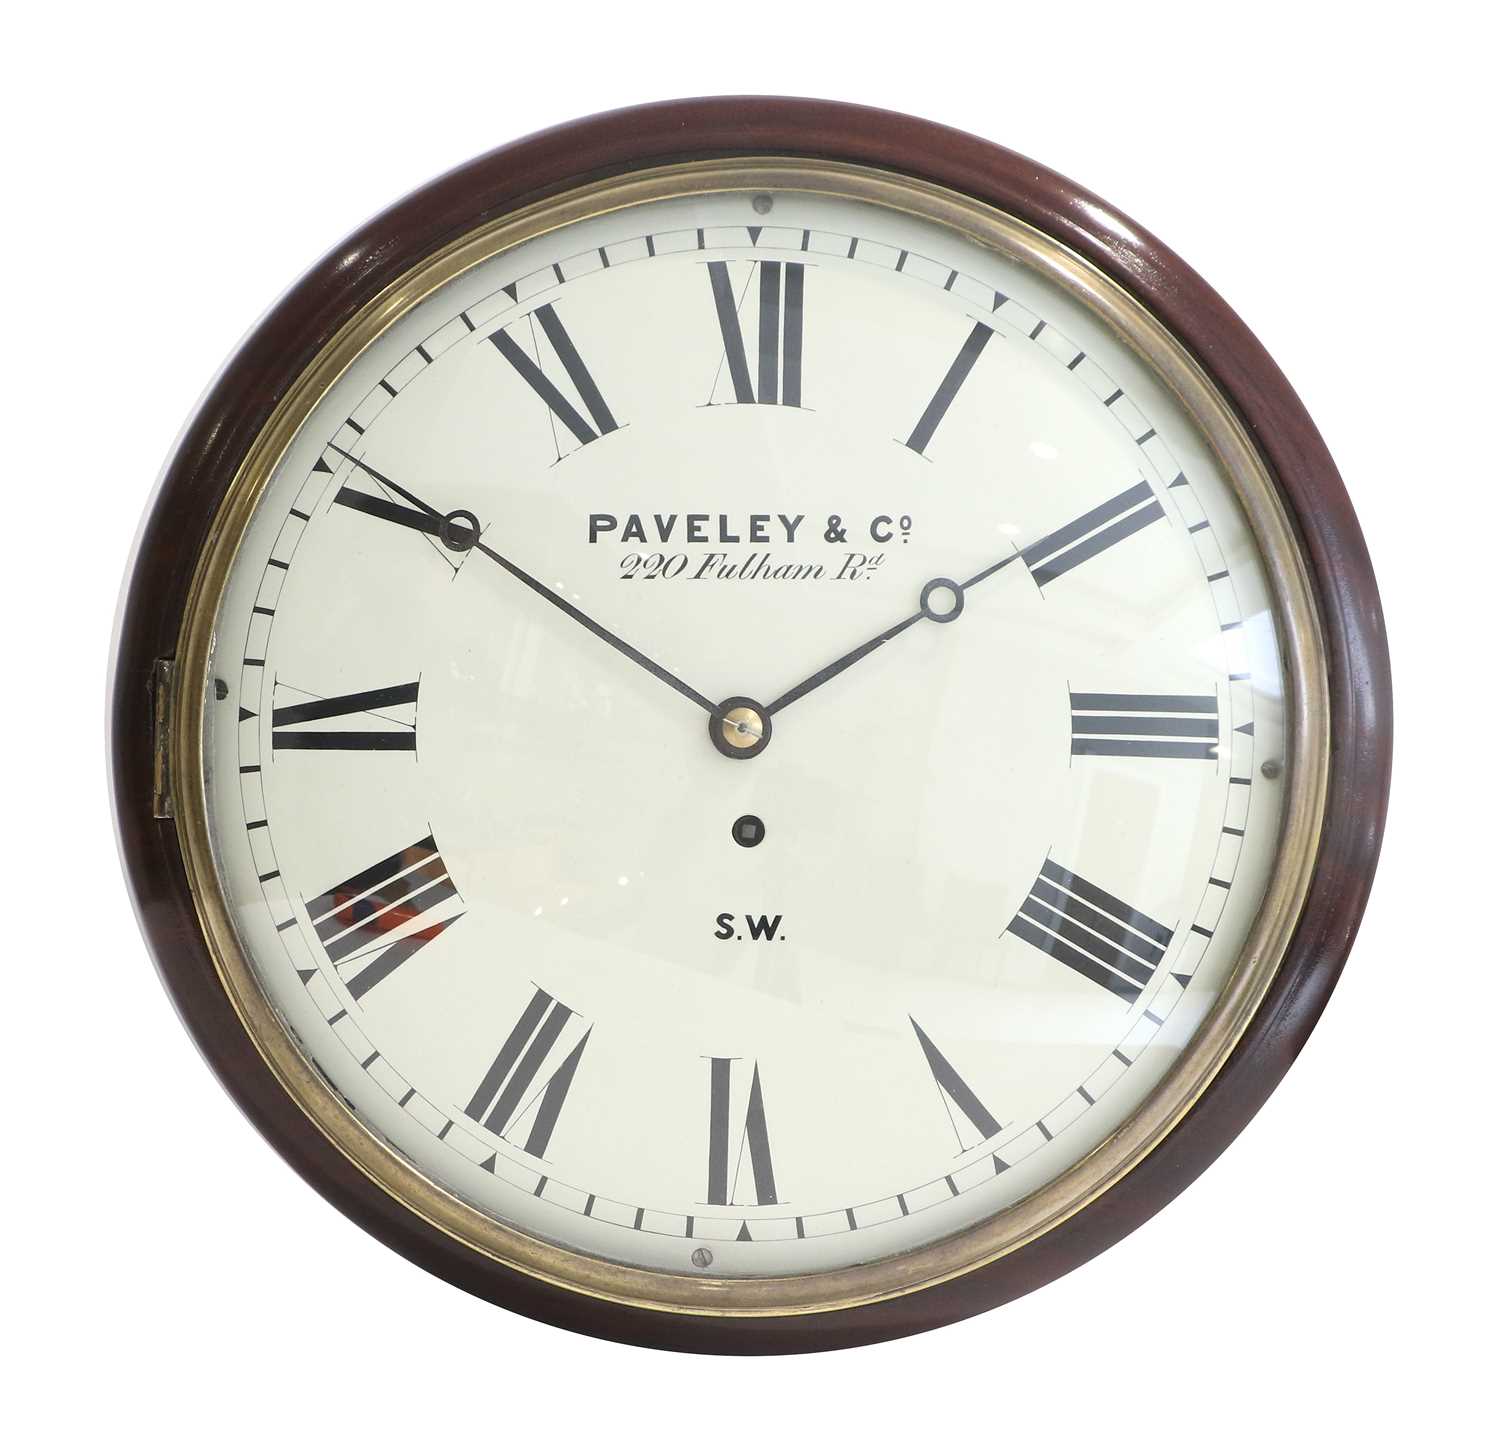 A Mahogany Wall Timepiece, signed Paveley & Co, 220 Fulham Rd, S.W, circa 1860, case with side and